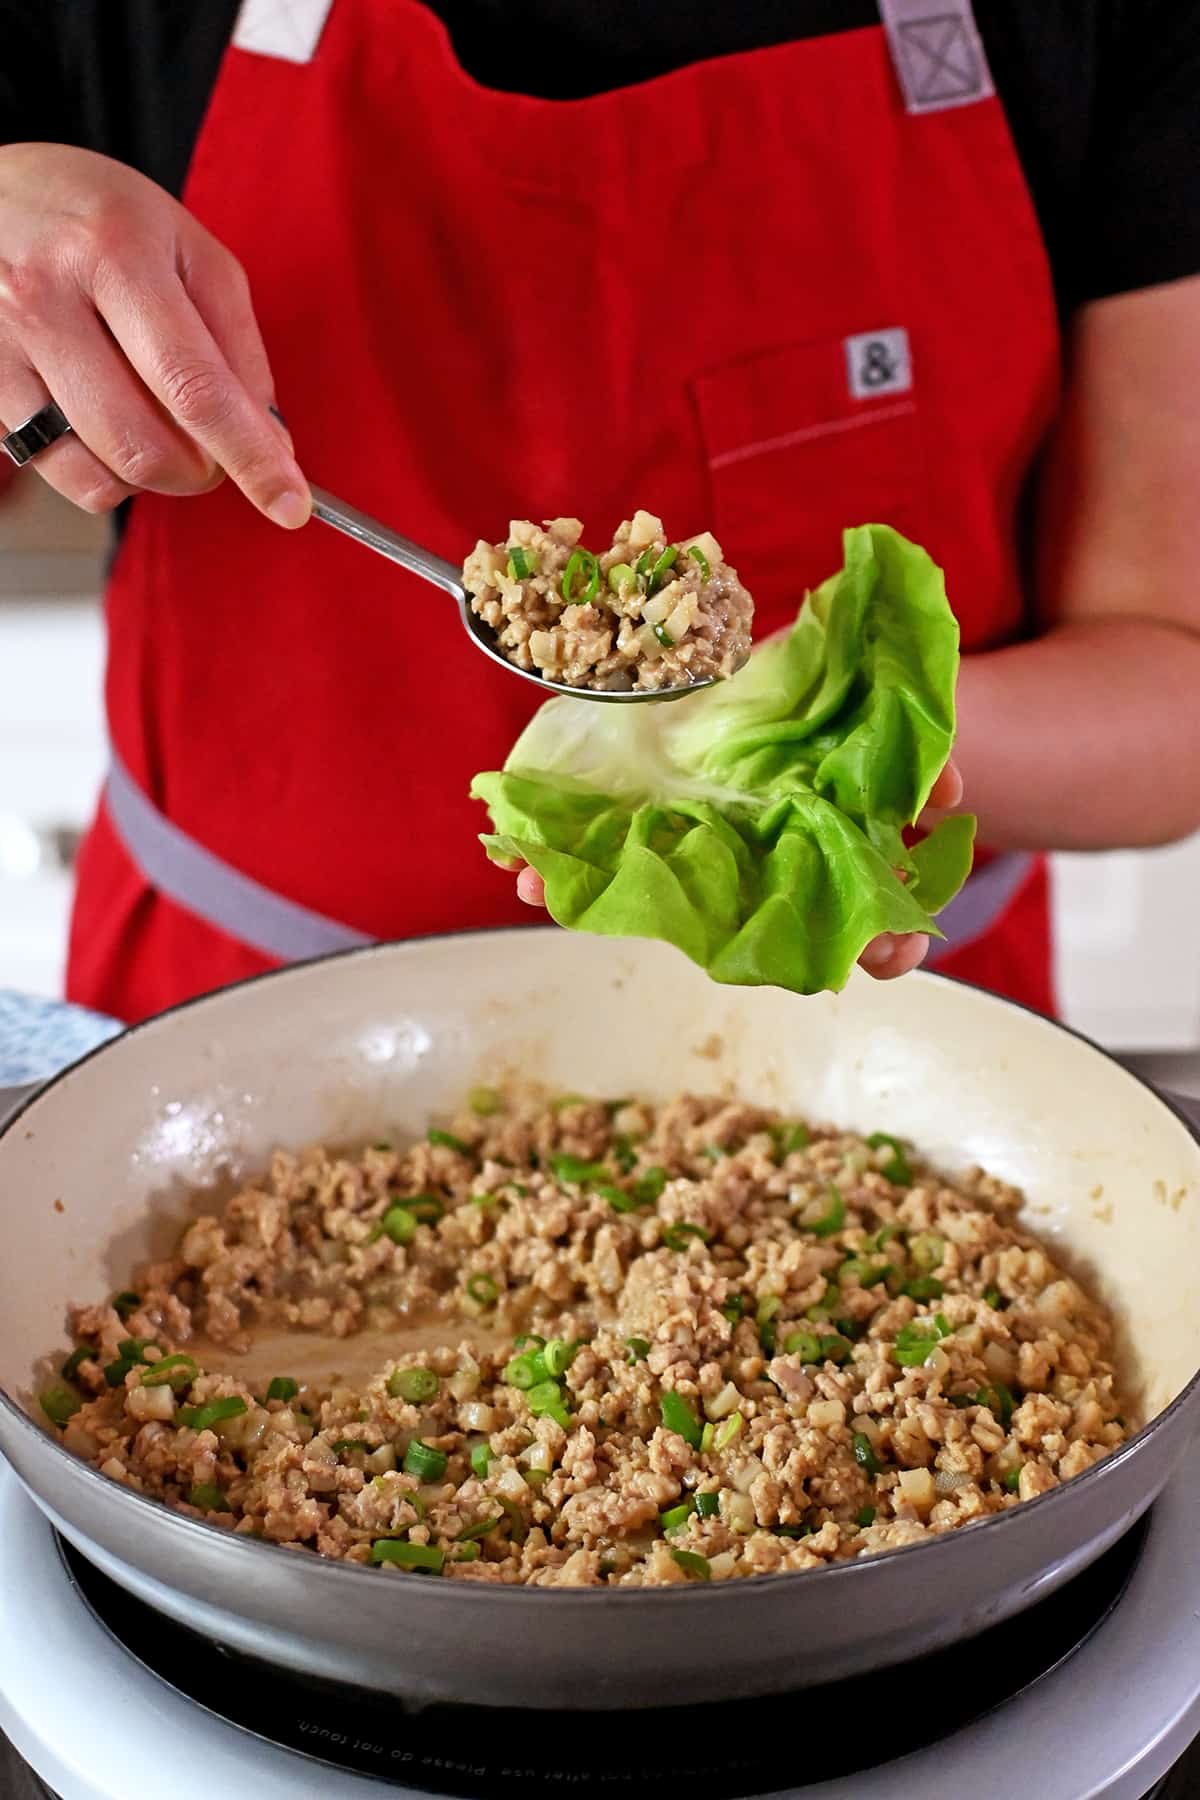 Spooning seasoned ground chicken from a skillet into a lettuce leaf.